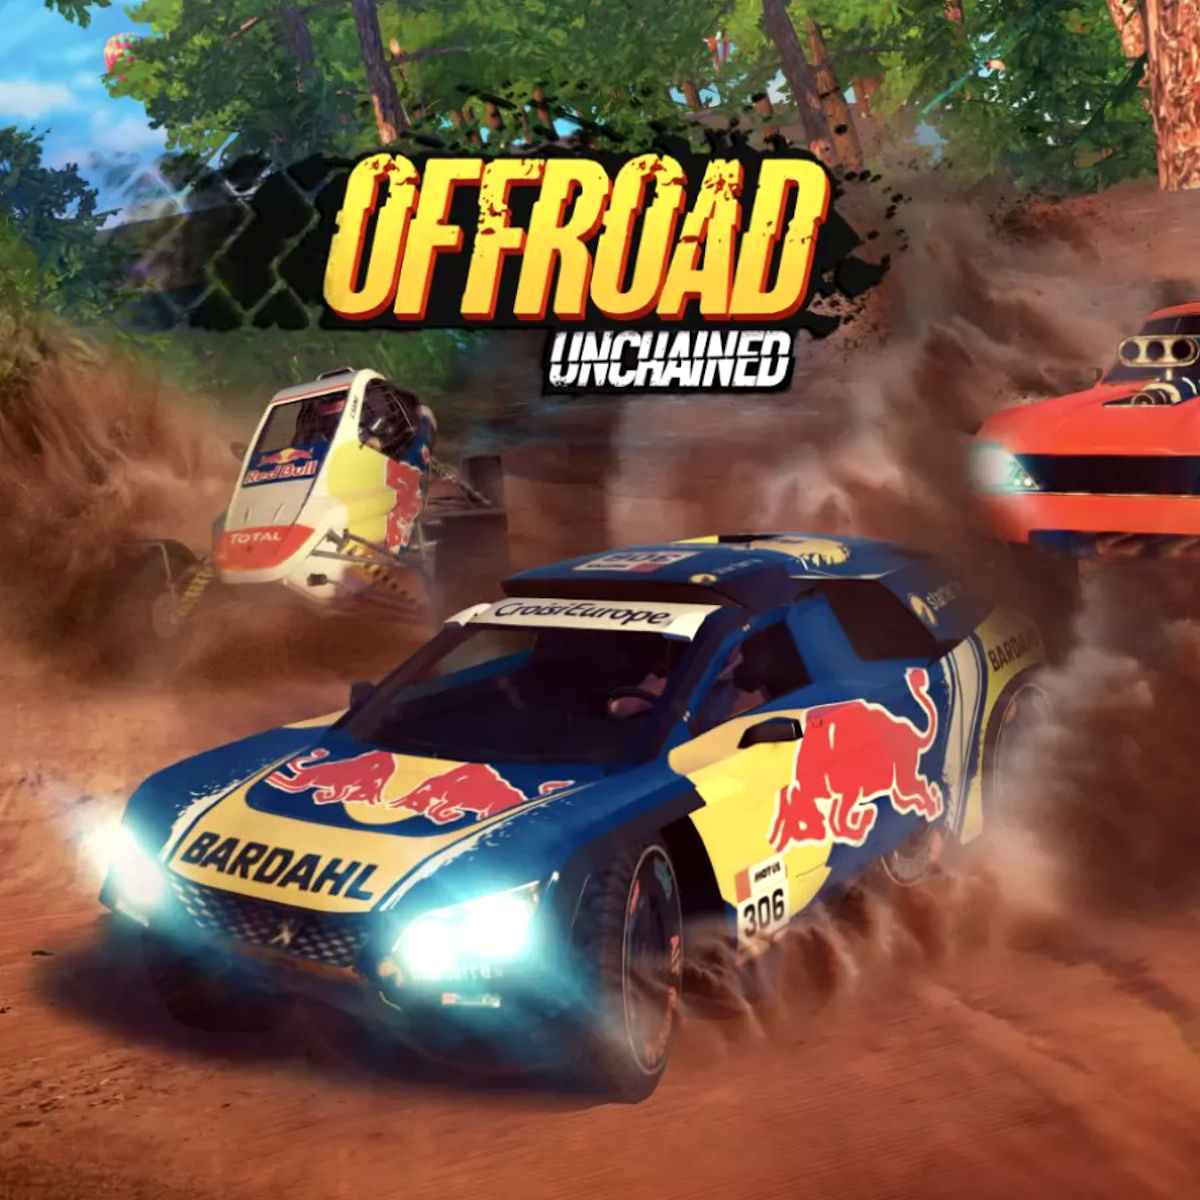 Red Bull Offroad Unchained